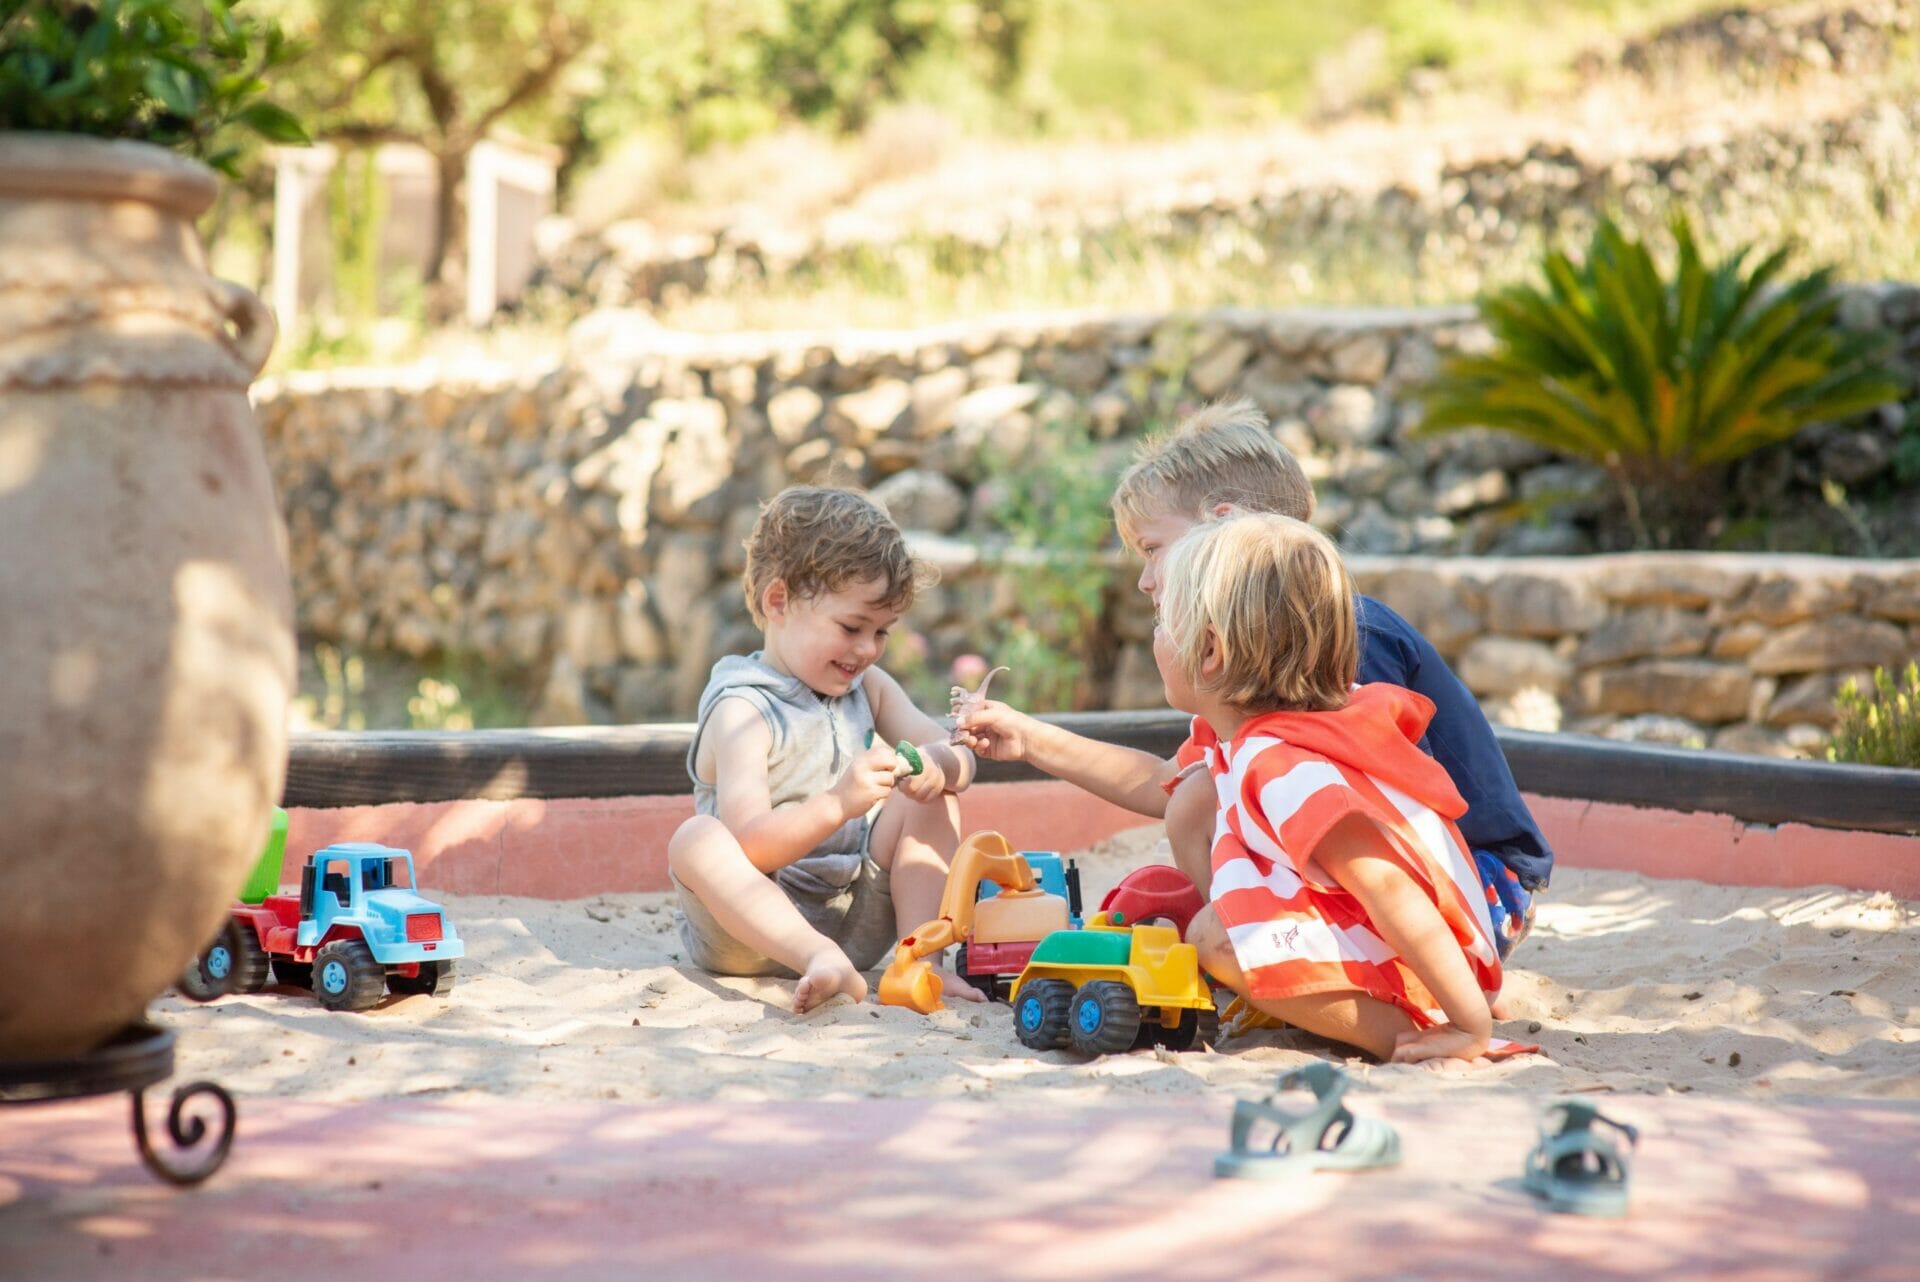 What to look for in a Baby and Toddler Friendly Holiday venue